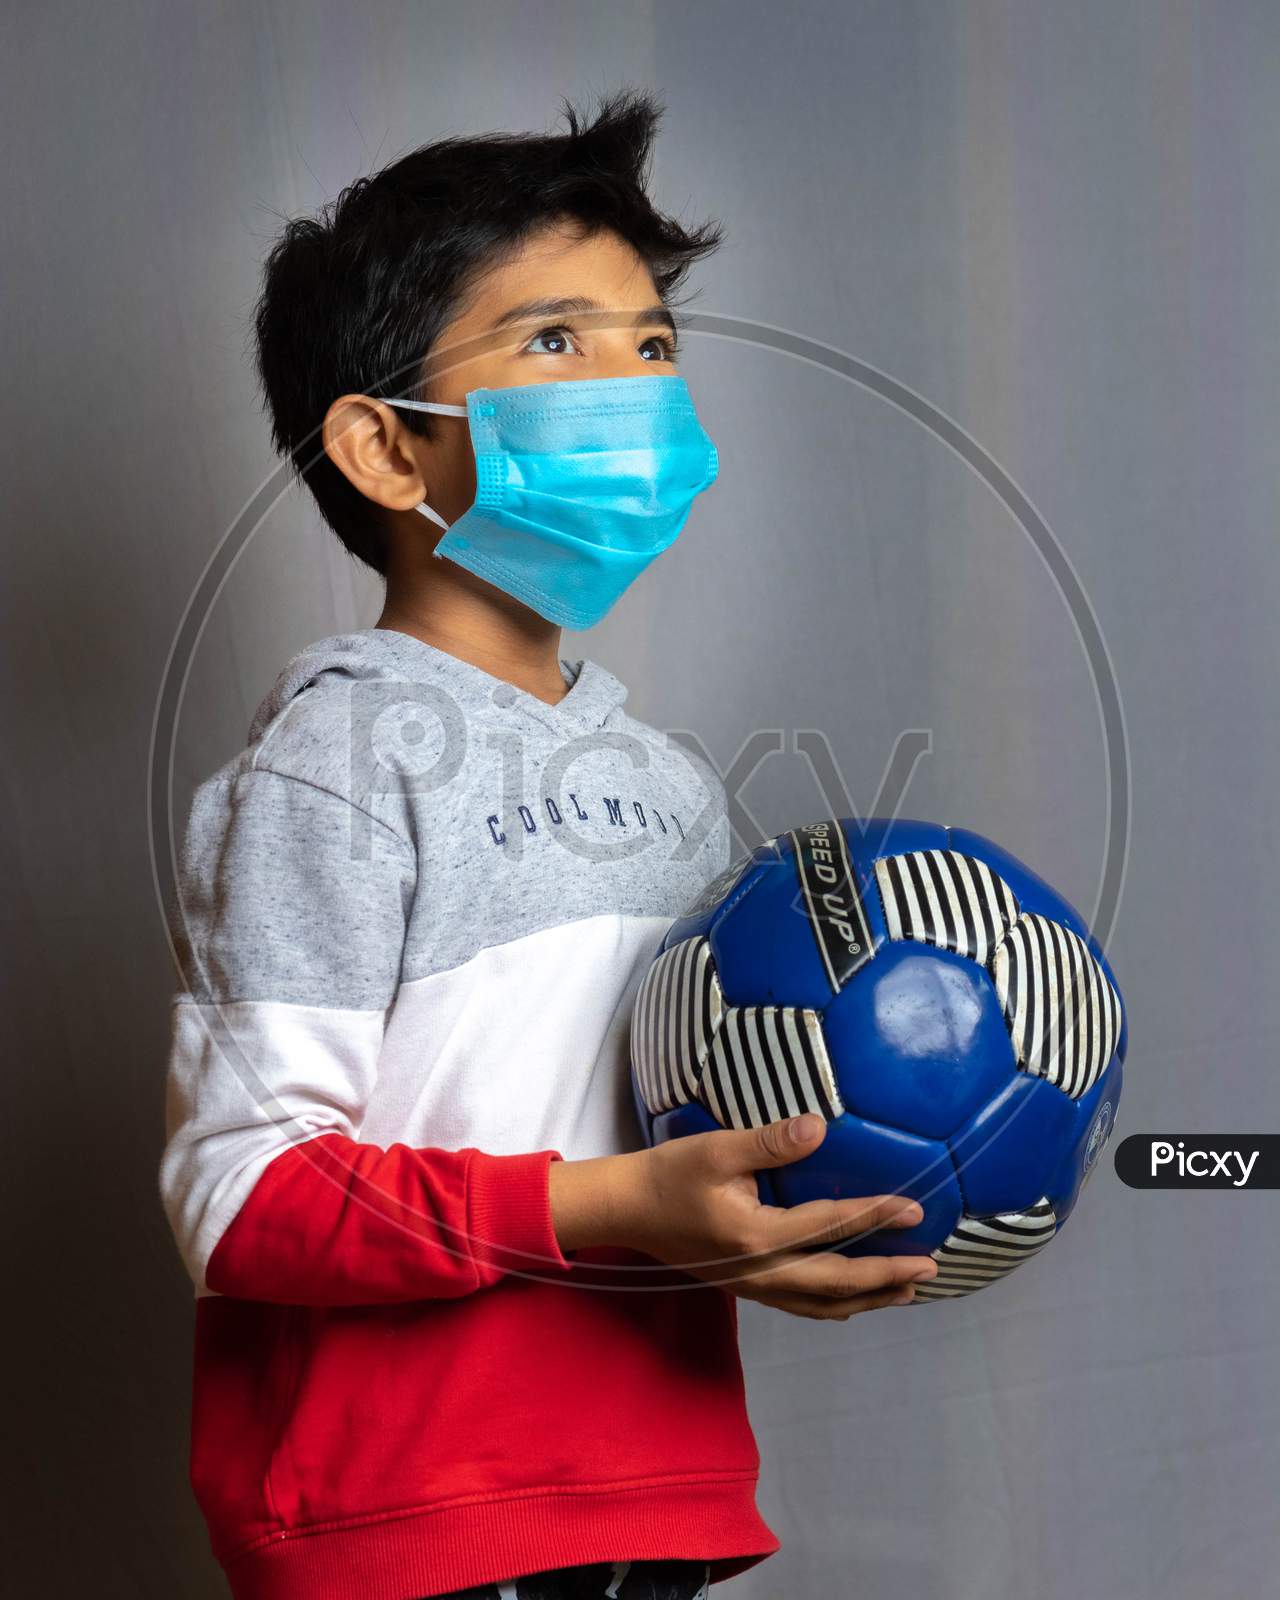 Portrait of a boy wearing mask and playing soccer inside home during CoronaVirus Lockdown. Stay home, stay safe.